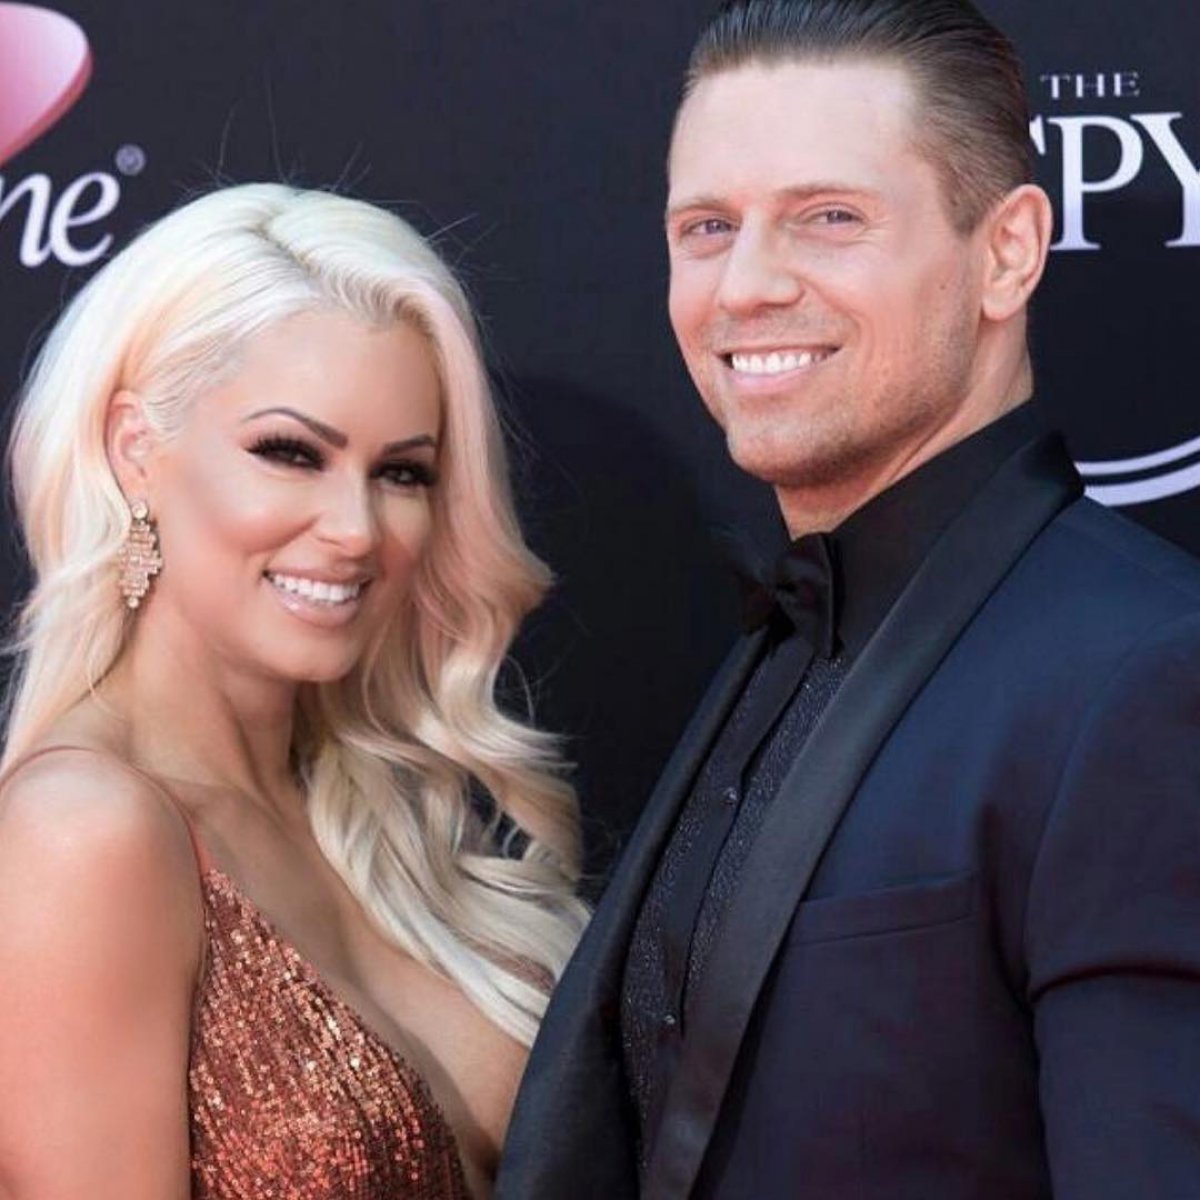 The Miz and fellow WWE star Maryse expecting their first child - Reality TV World